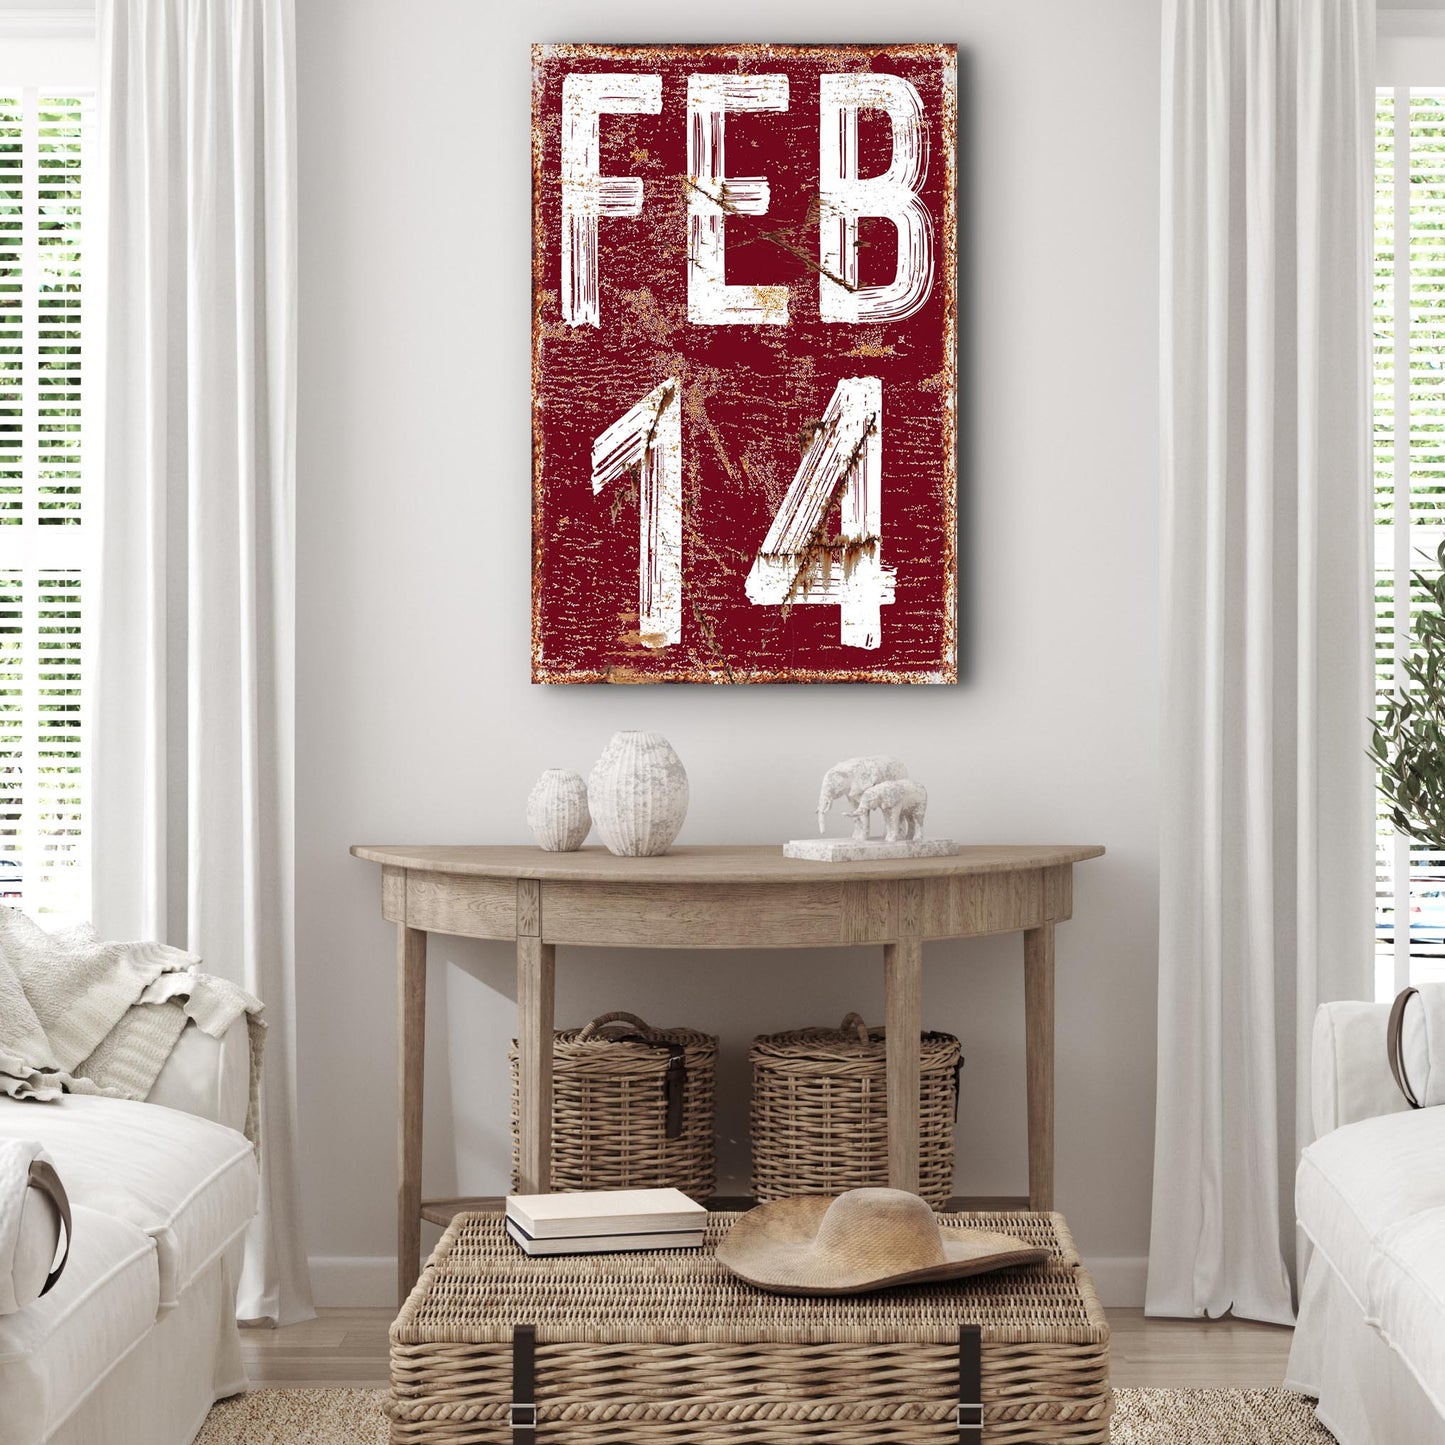 Feb 14 Sign - Image by Tailored Canvases